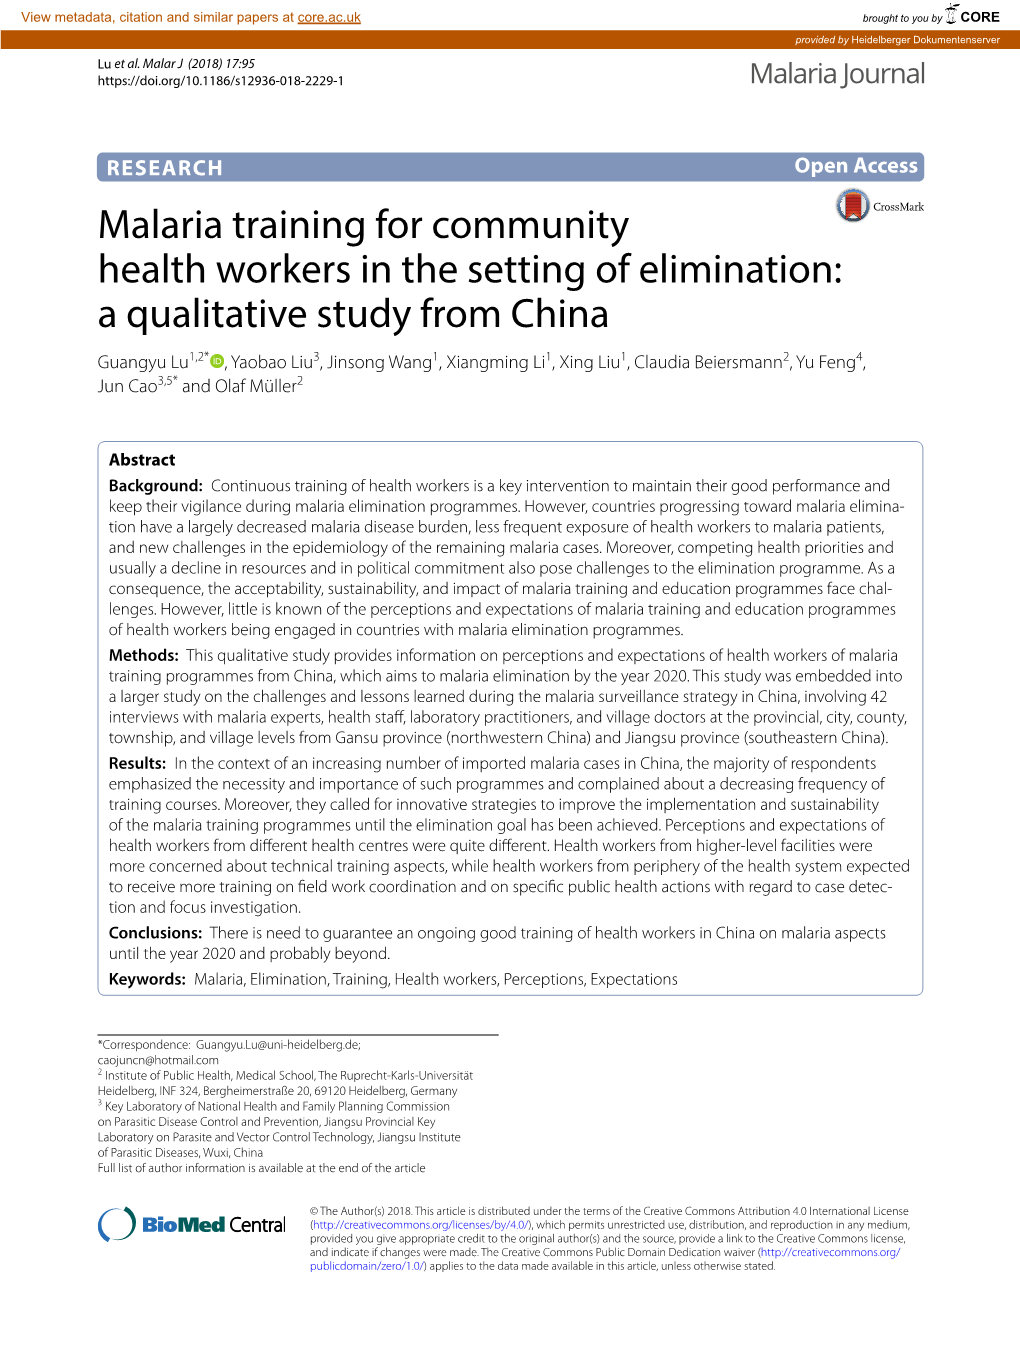 Malaria Training for Community Health Workers in the Setting of Elimination